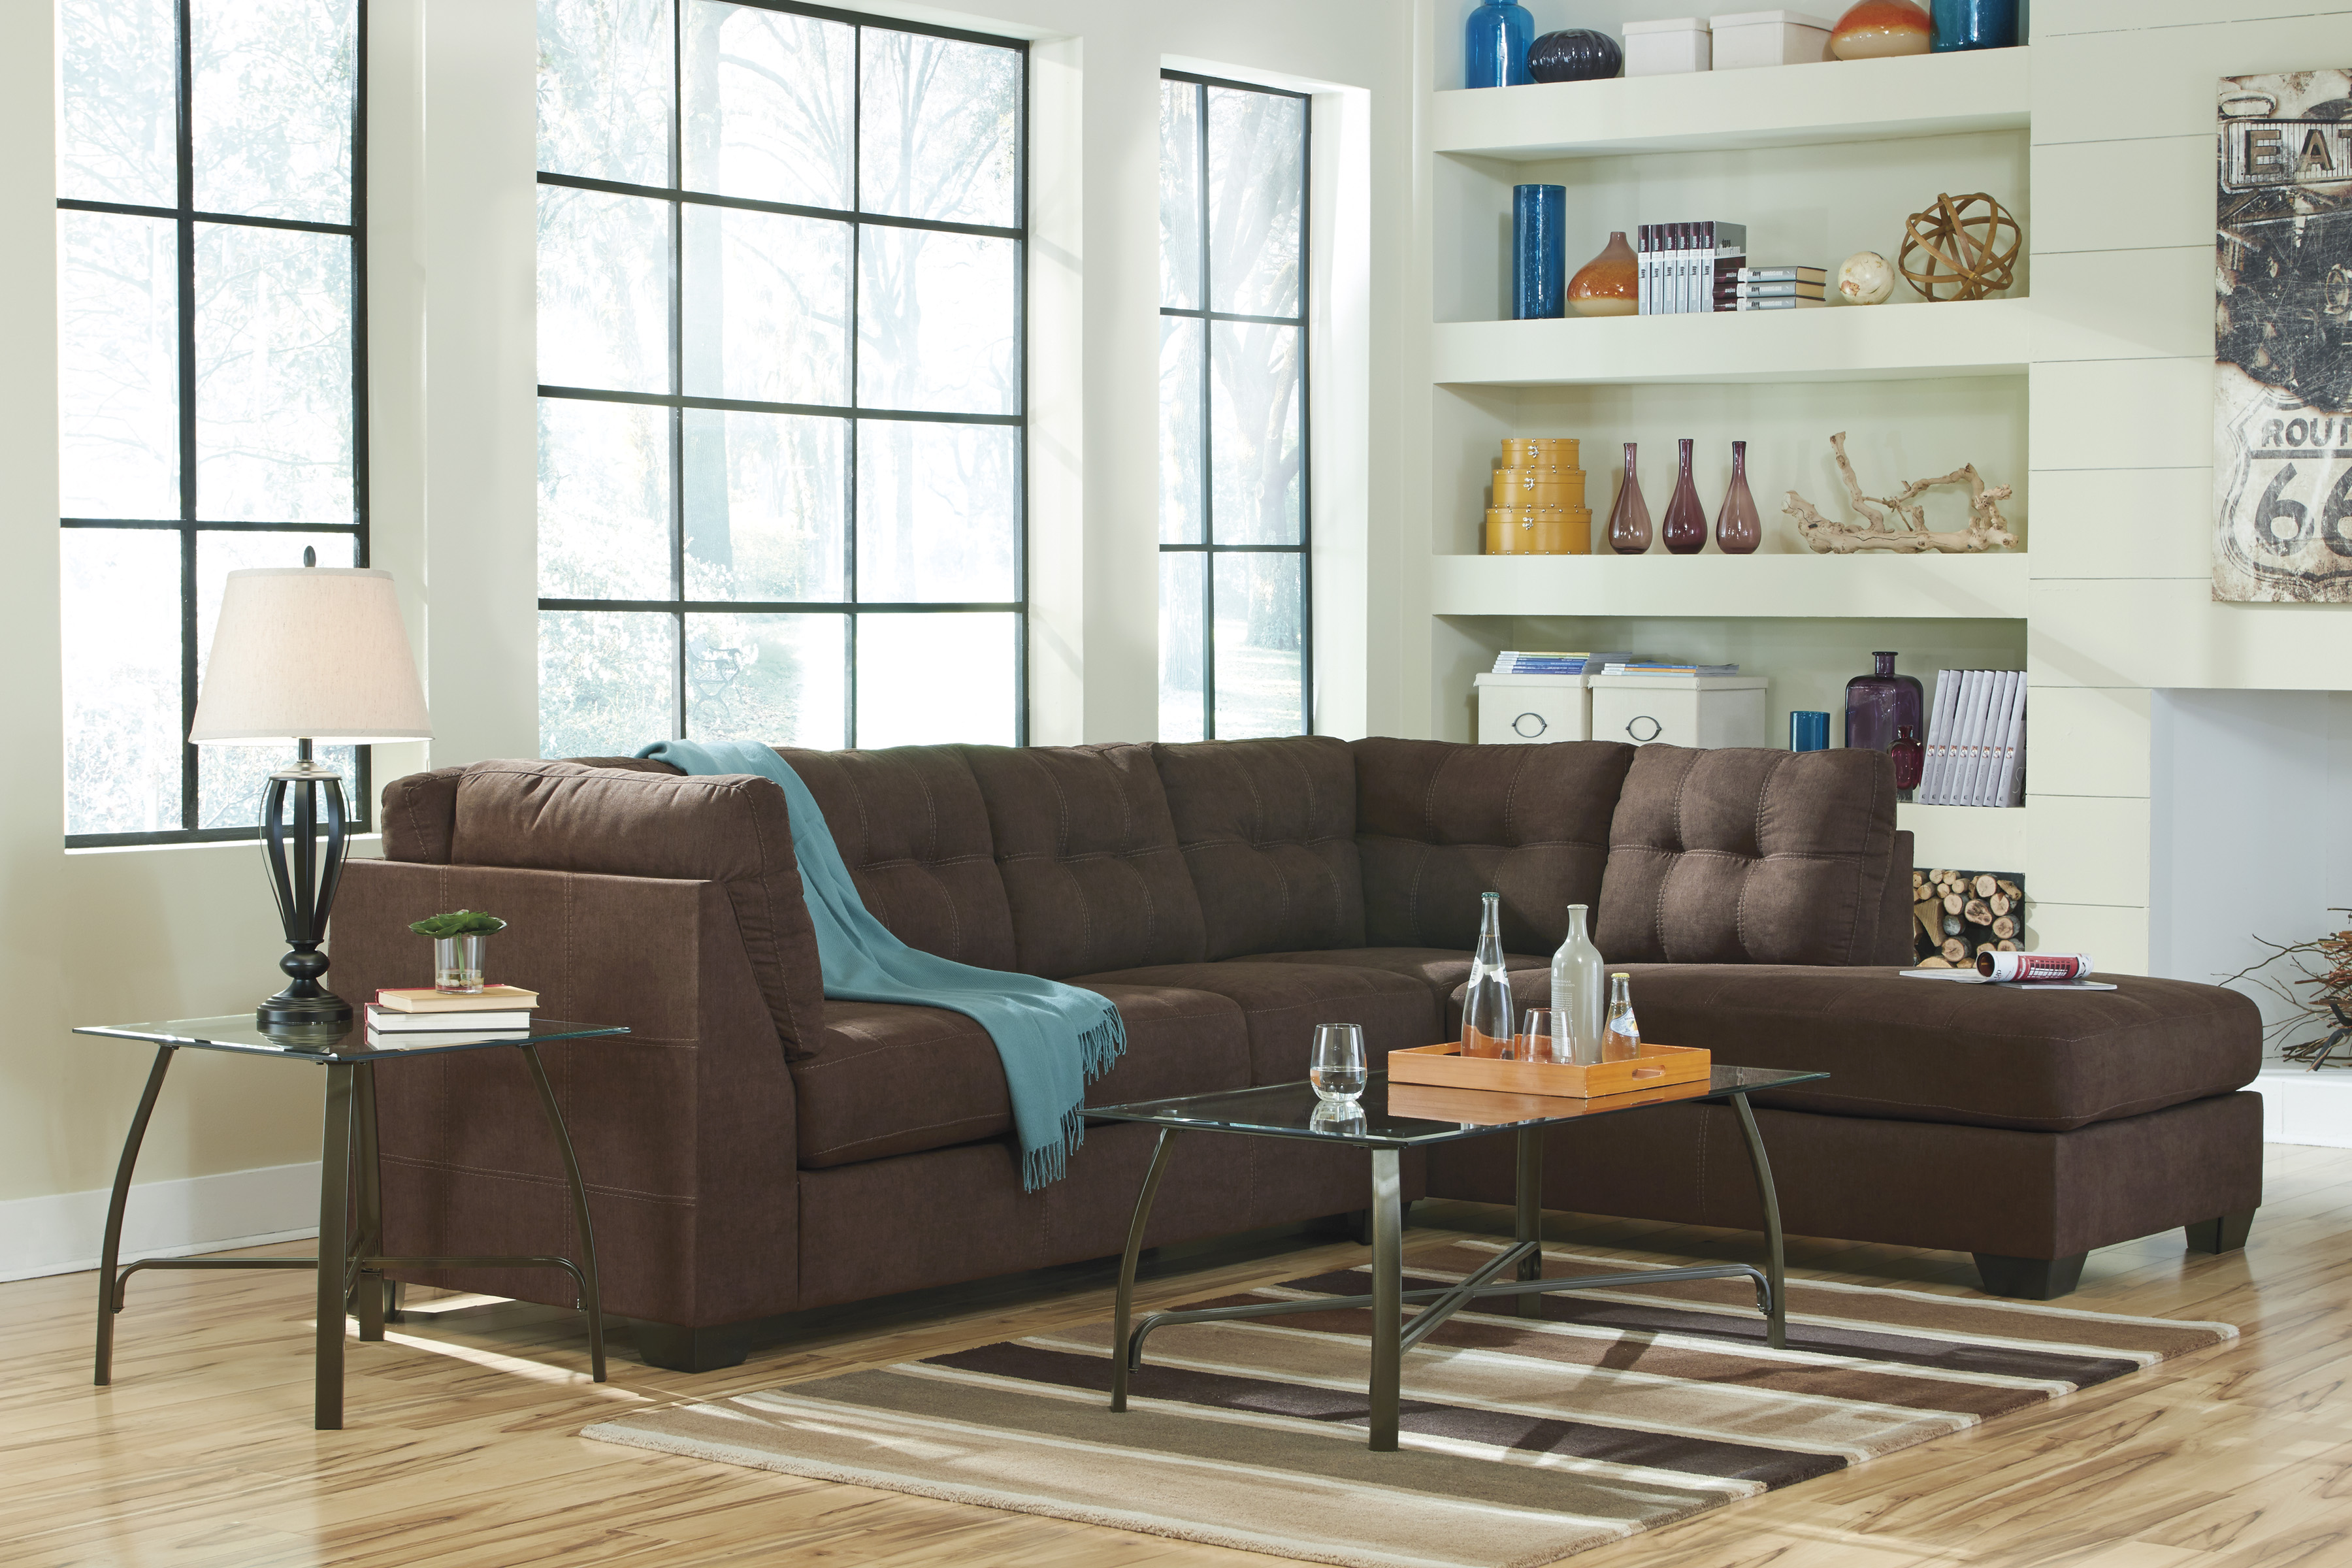 Majik | Maier Charcoal Sectional With Right Chaise | Rent To Own Furniture in Pennsylvania